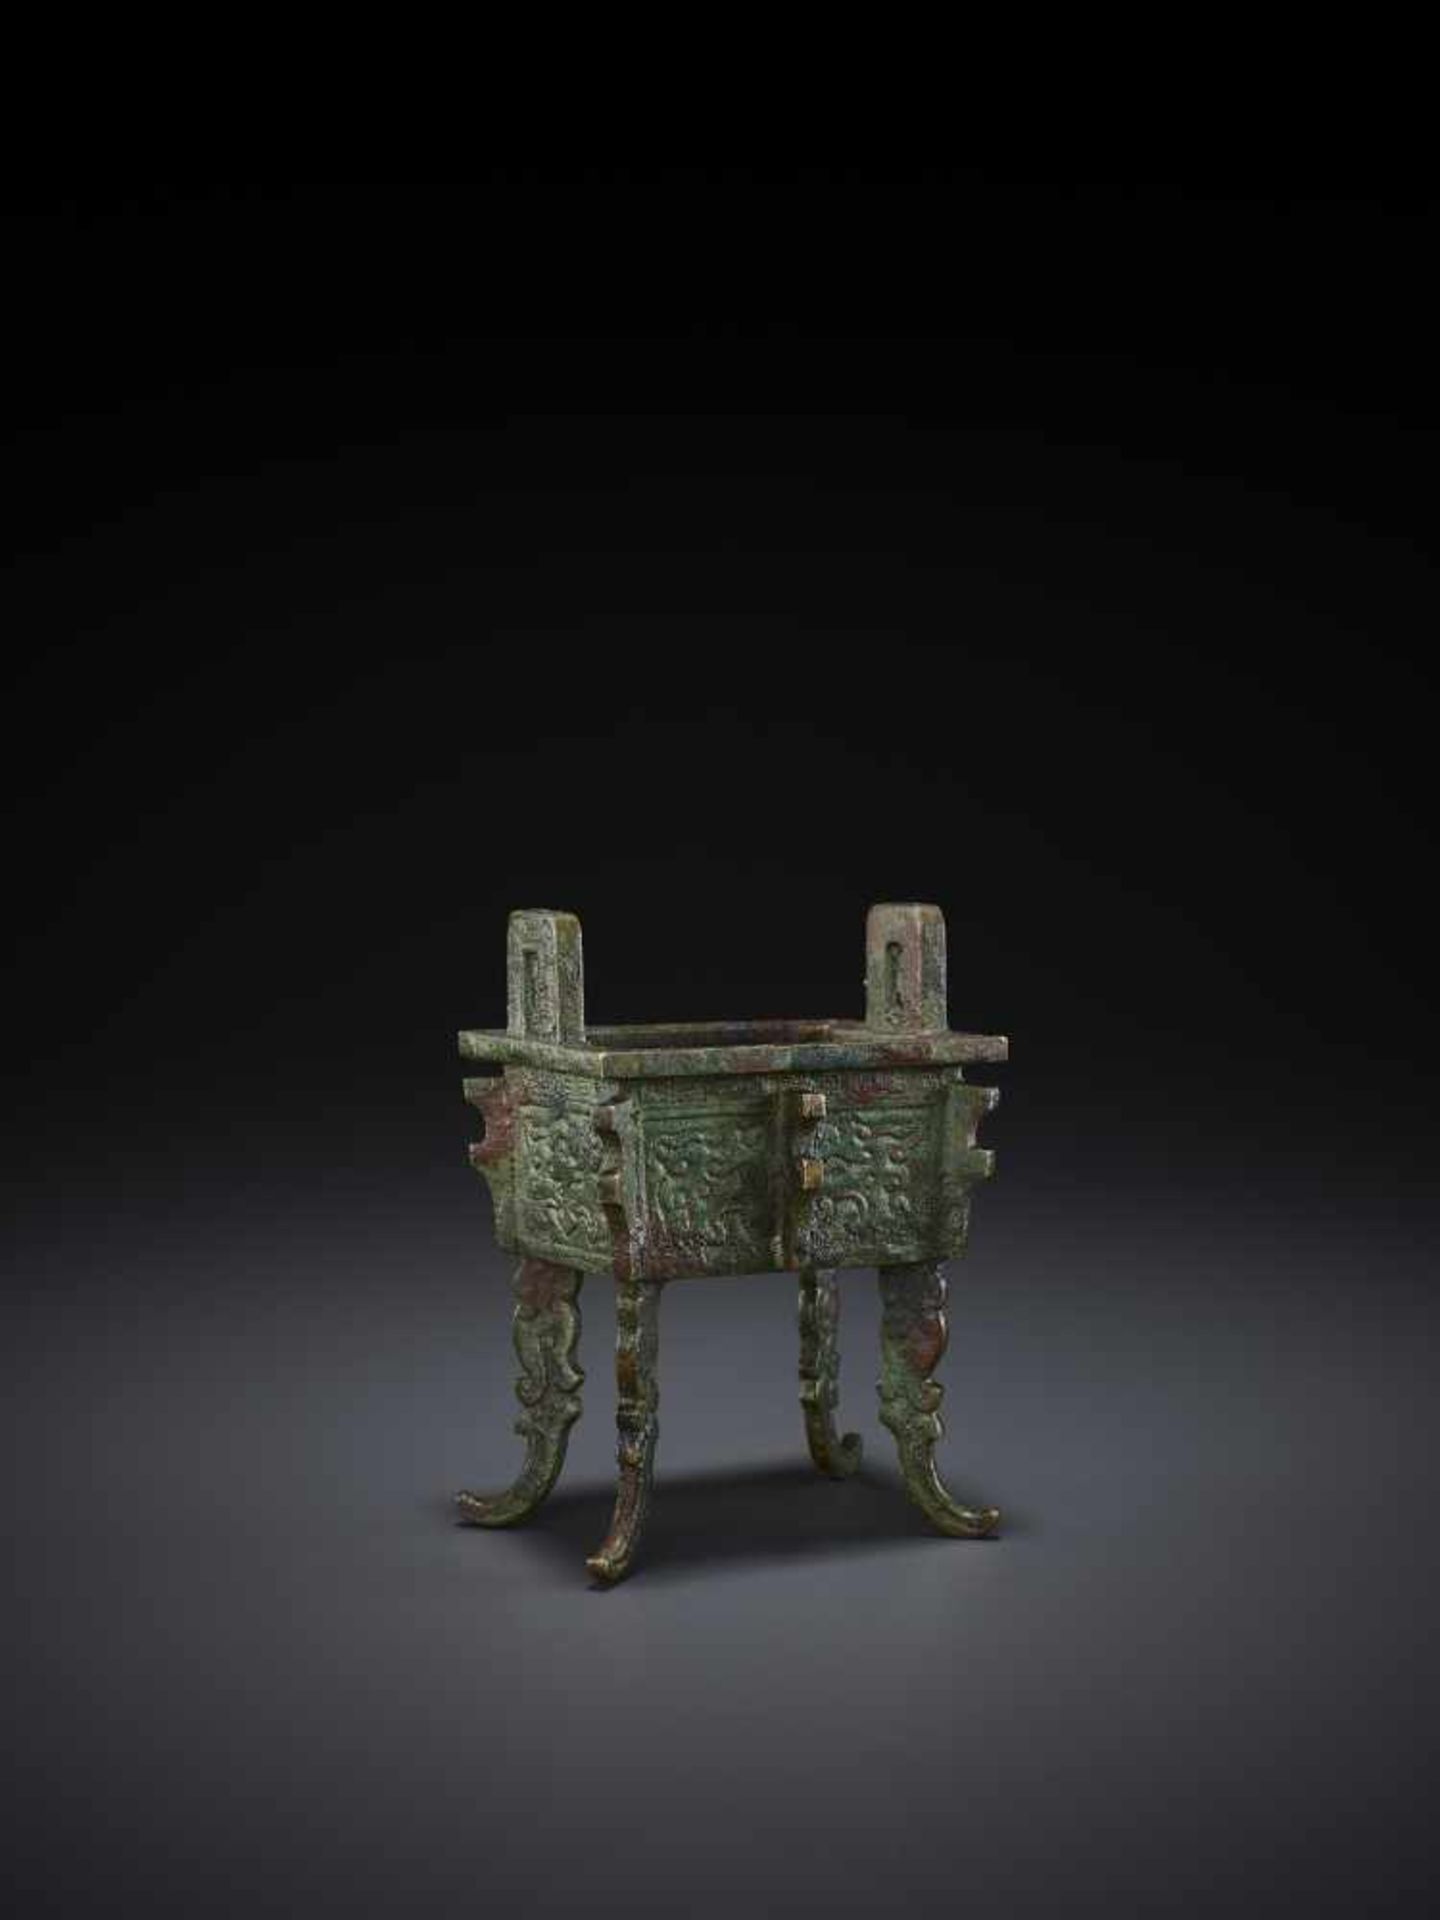 A MINIATURE BRONZE MODEL OF A FANGDING China, Qing dynasty. The miniaturized ritual food vessel